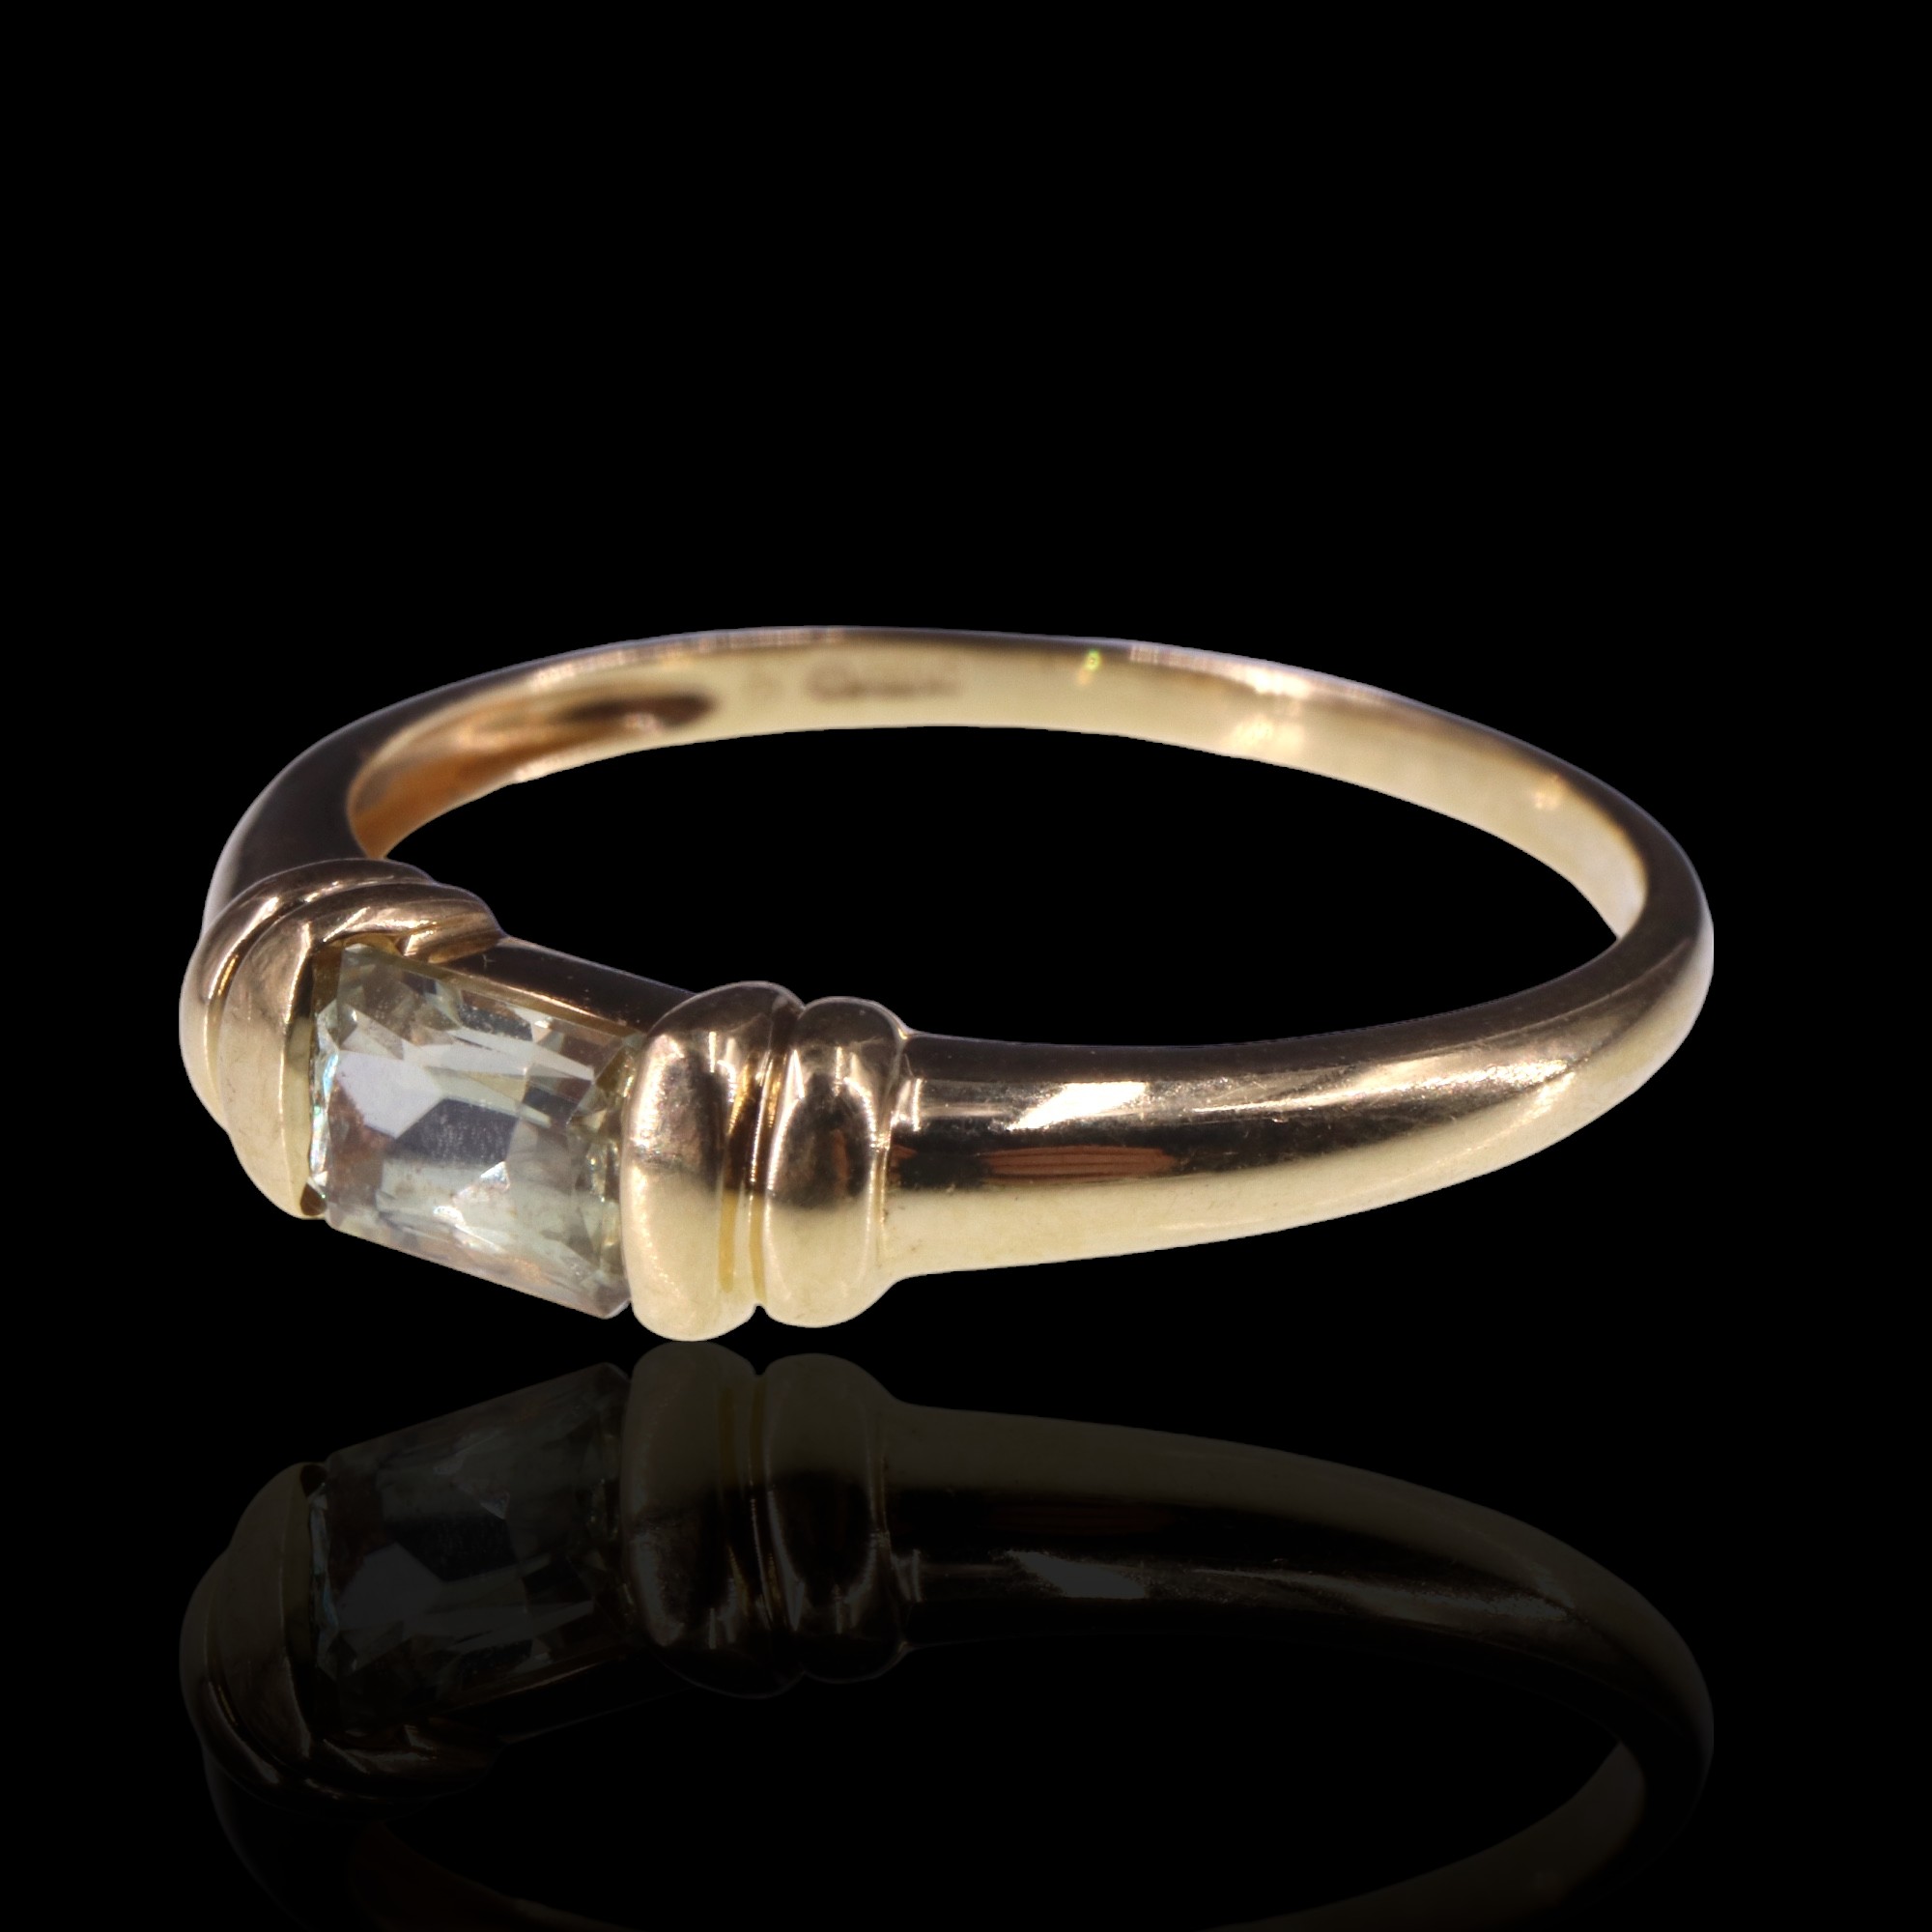 A pale yellow topaz finger ring, the emerald cut stone clinched between paired collars on an 18 ct